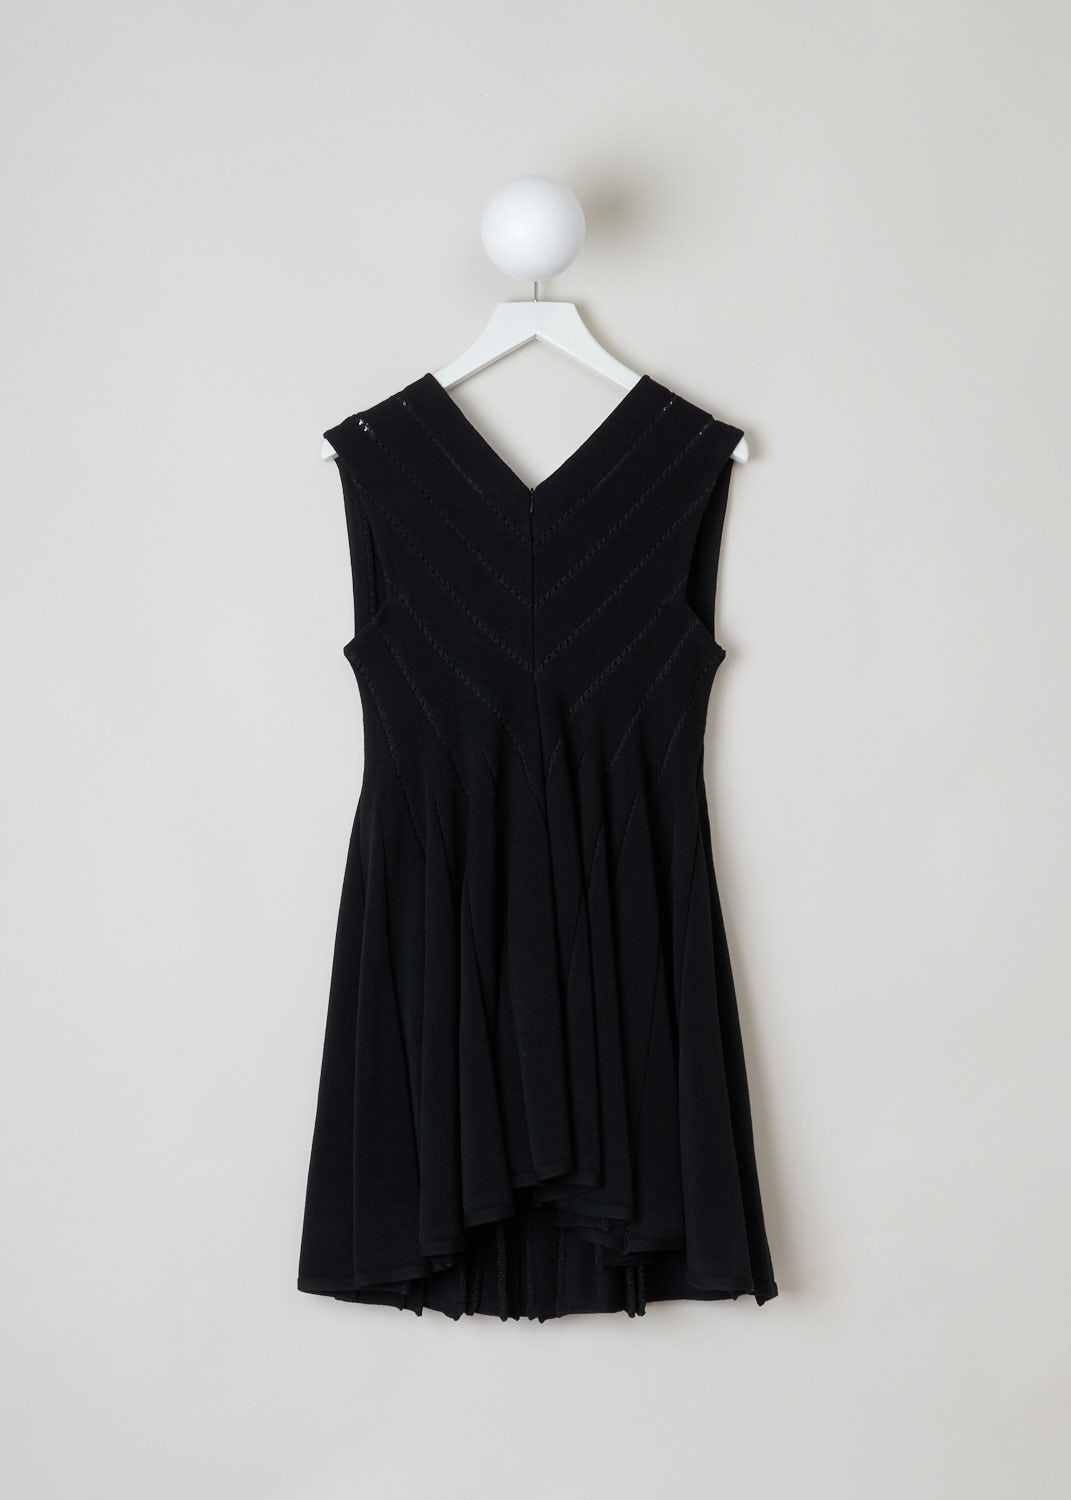 Alaïa, Black babydoll dress with embroidered detailing, 4W9RB20CM120_baby_doll_SM_noir_C999, black, back, Black babydoll dress featuring a square cut neckline on the front and a v-shape on the back. The top of this dress is put together in strips of fabric held together by the black embroidery. The skirt of this model is designed with knife pleats and will flare out. The length of this model is thigh-height. Your fastening option on this model is the concealed zipper on the back.  